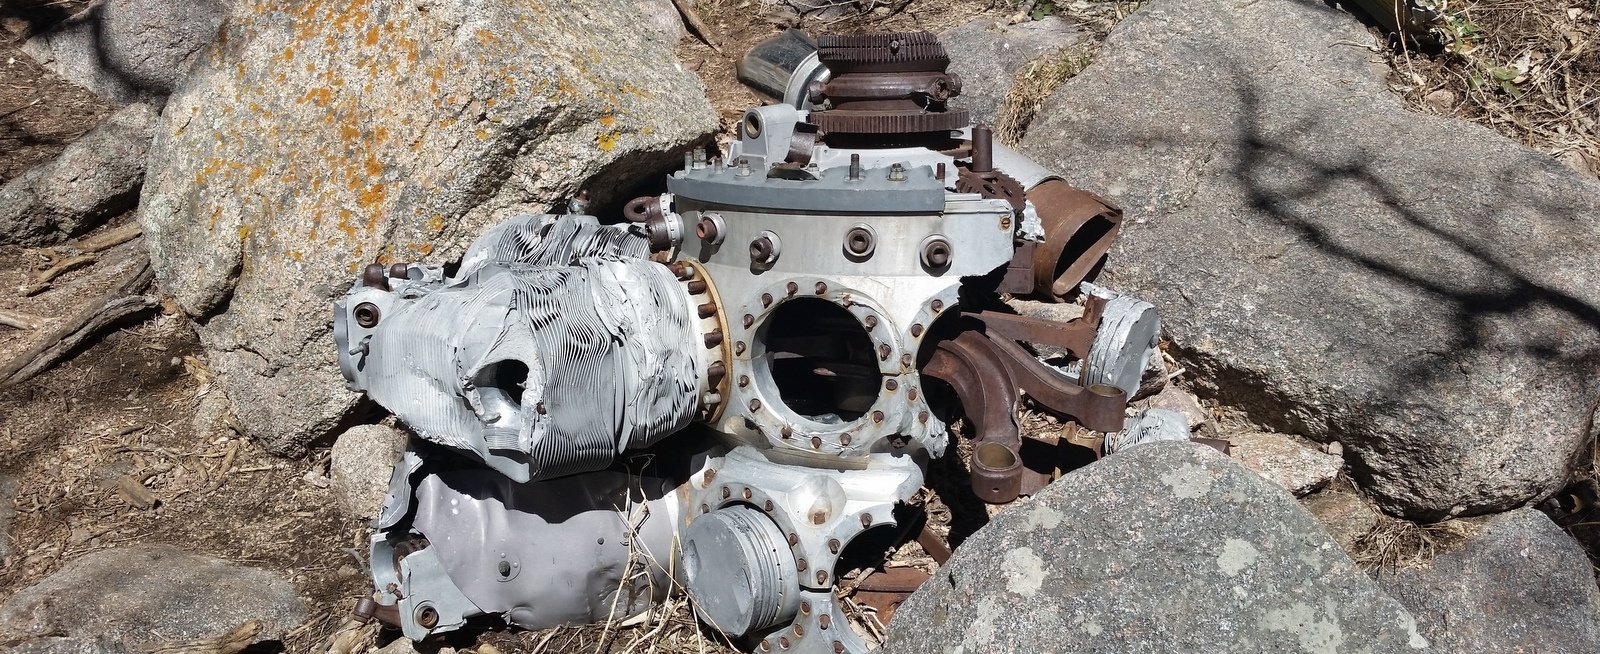 Domingo Baca Trail Is A Plane Wreckage Crash Site Hike In New Mexico